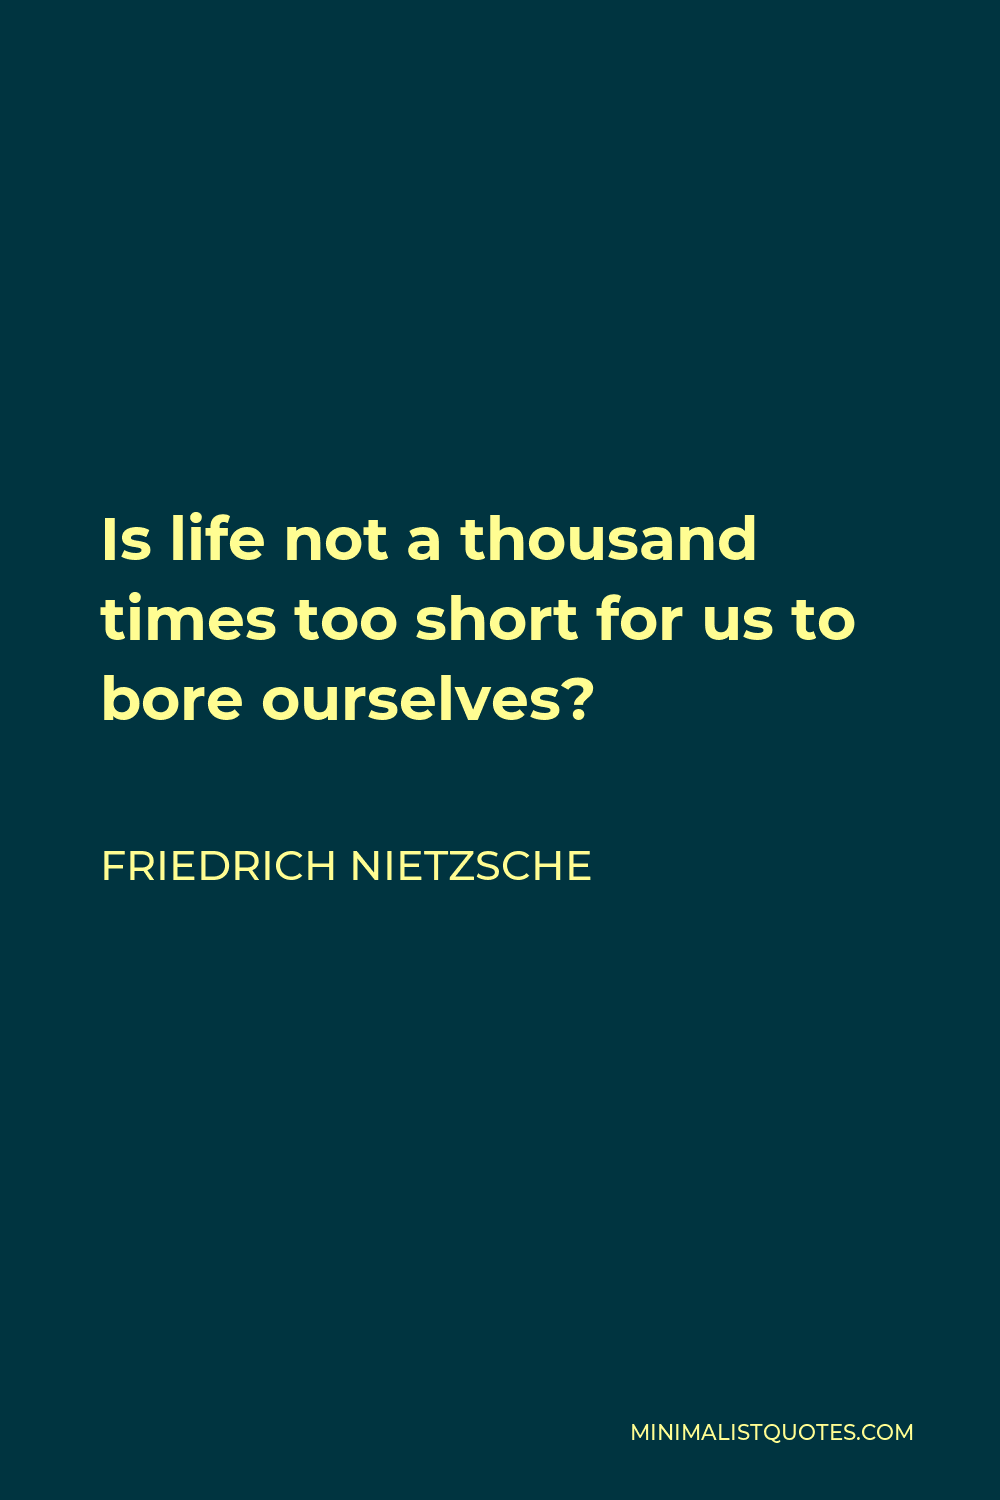 Friedrich Nietzsche Quote - Is life not a thousand times too short for us to bore ourselves?